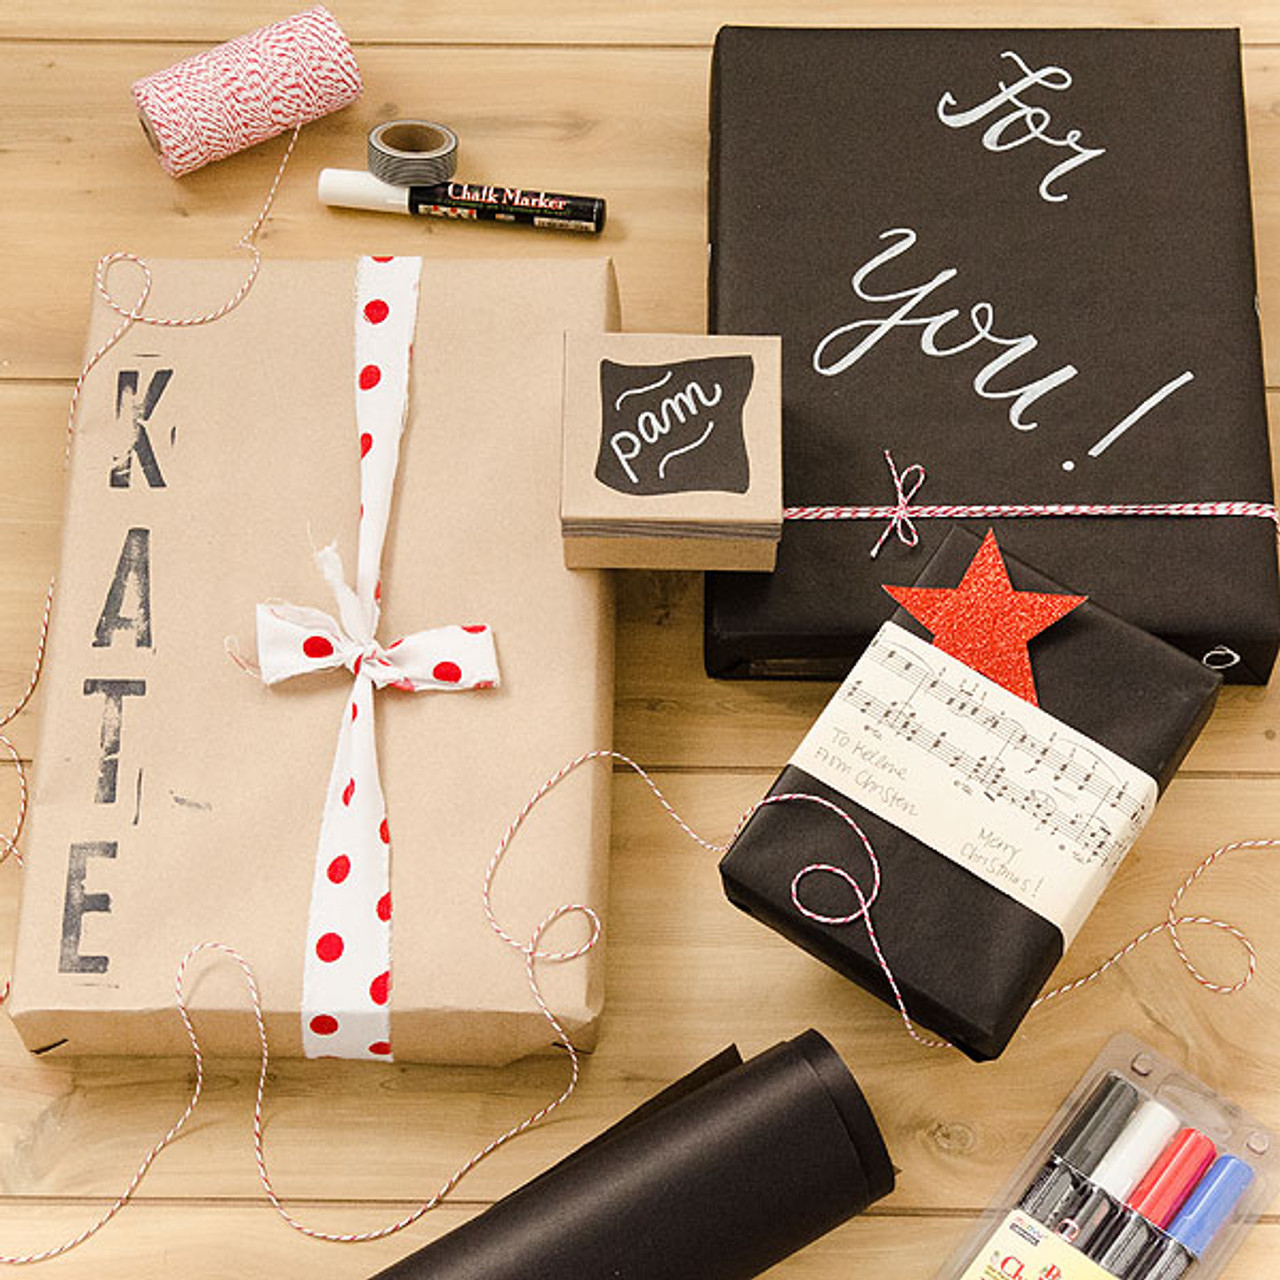 Chalk Marker Wrapping Paper